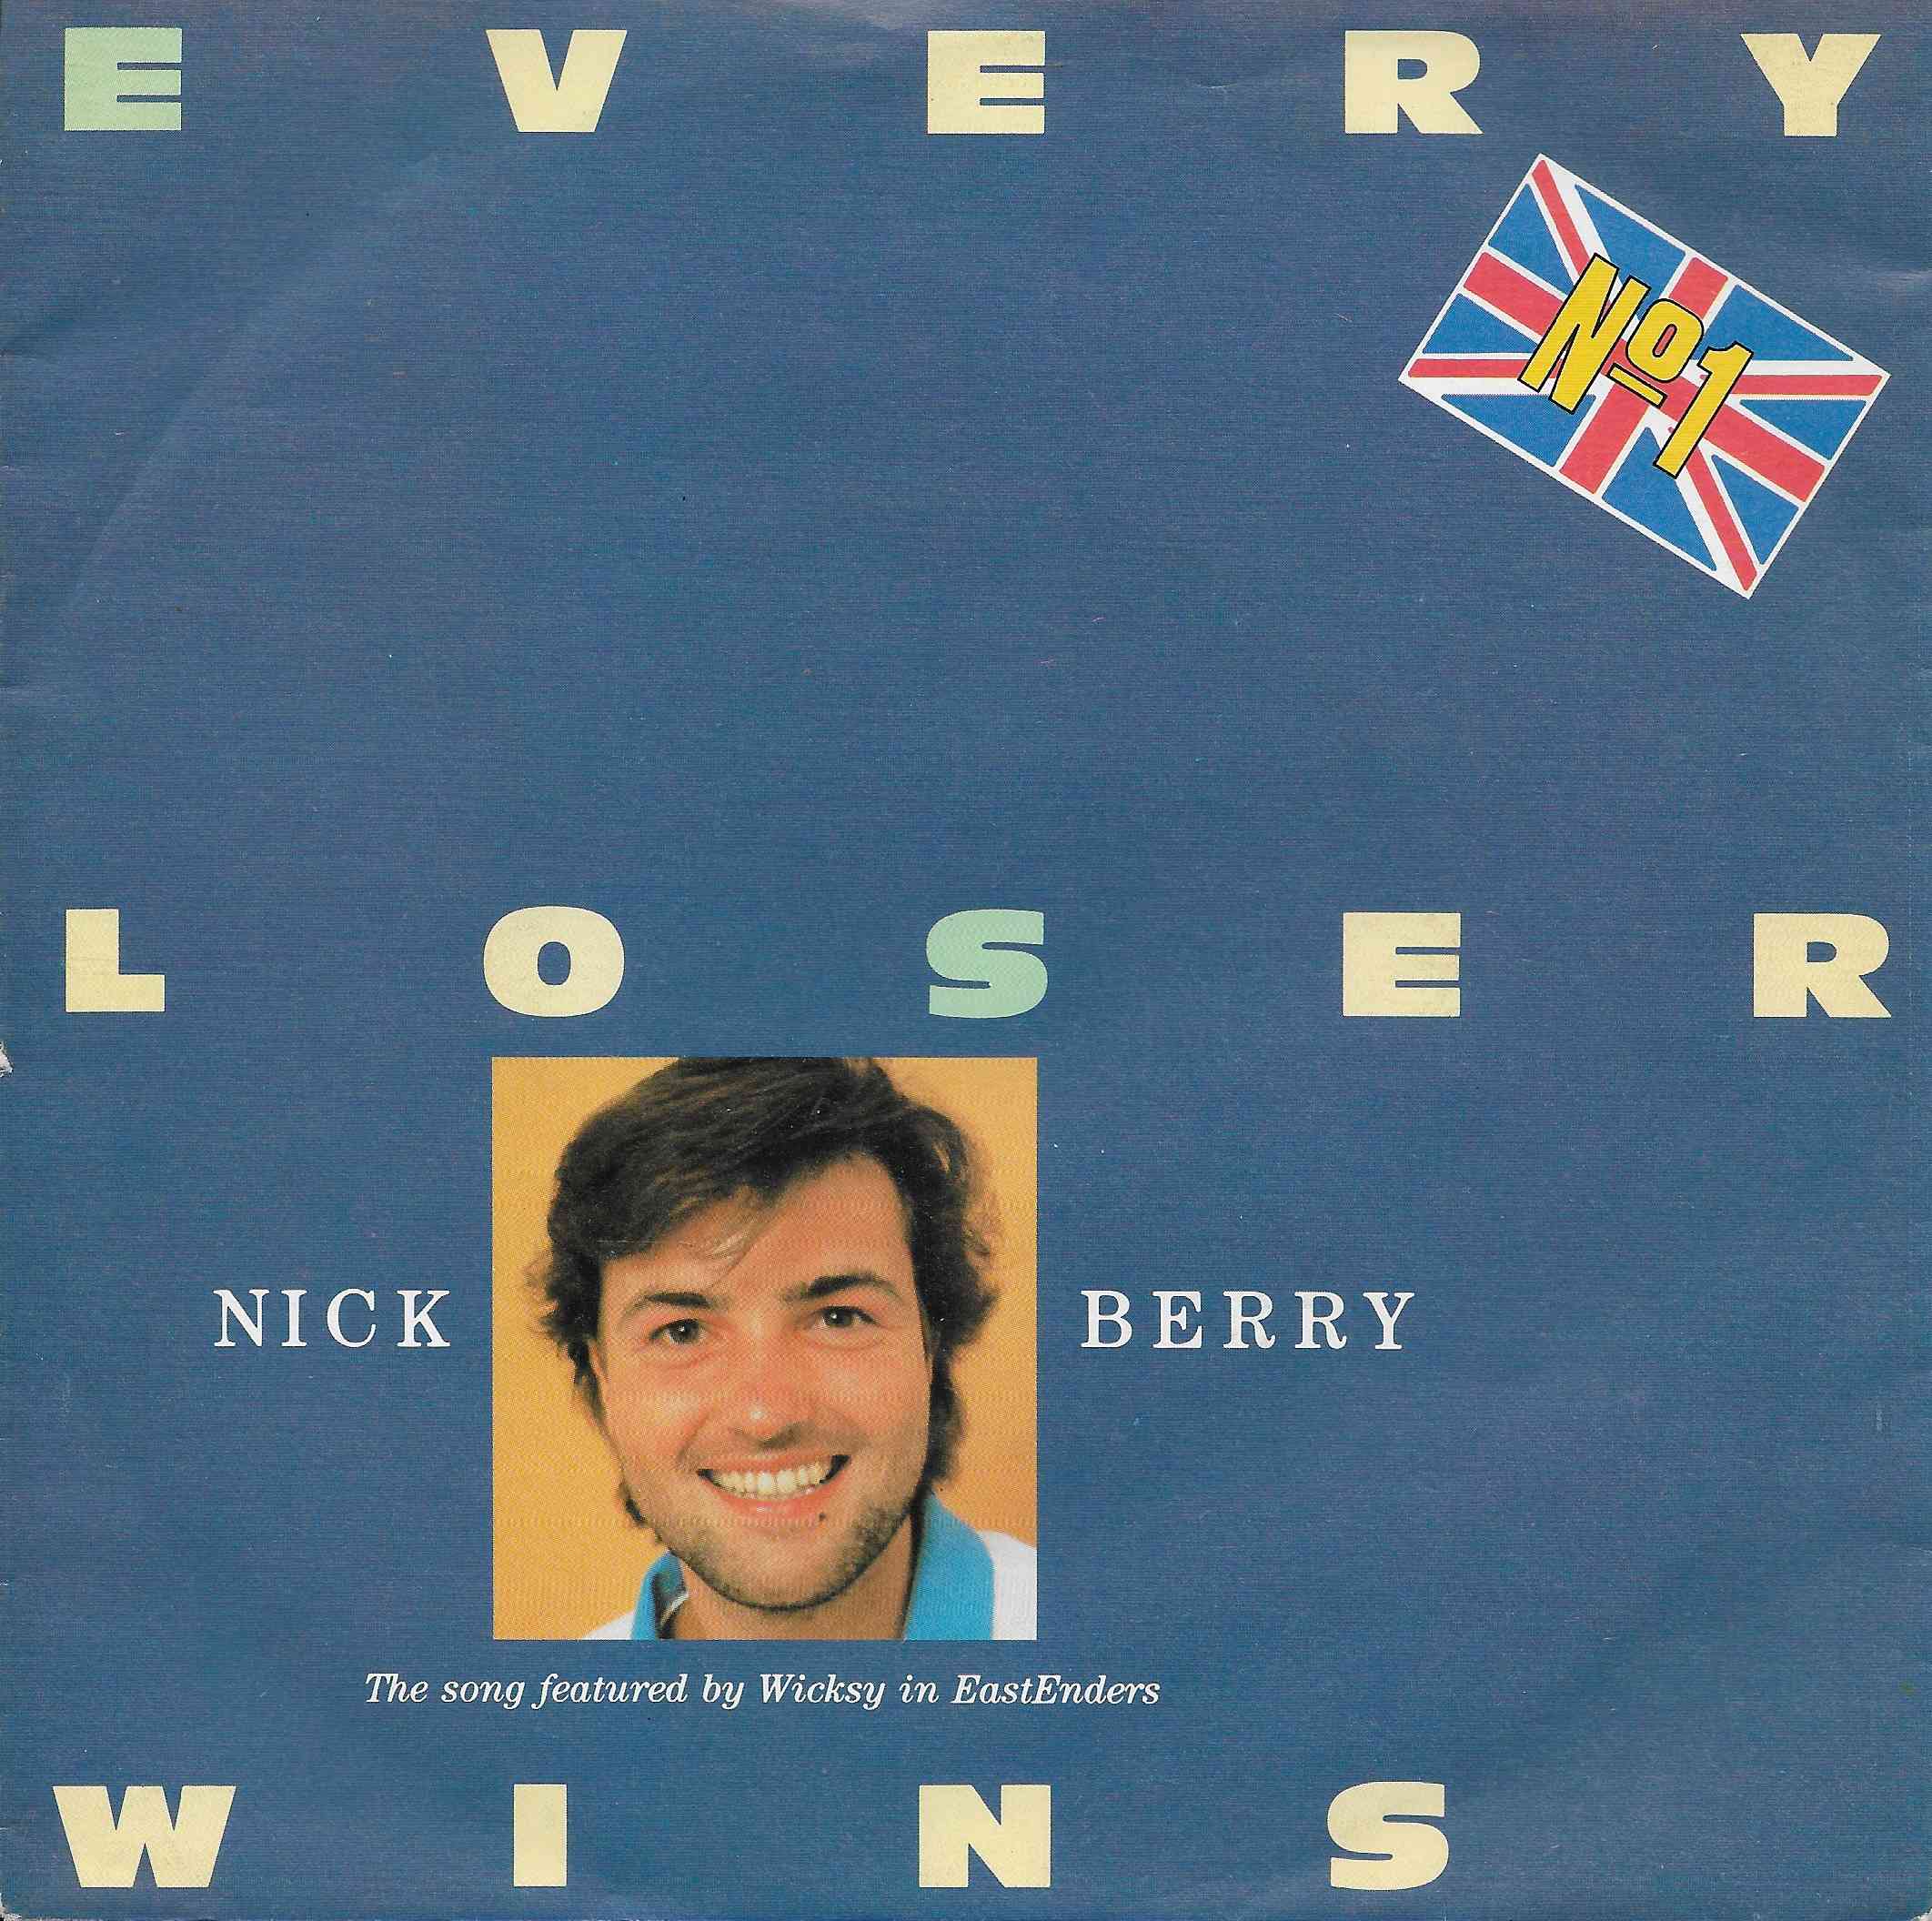 Picture of INT 113.011 Every loser wins by artist Simon May / Stewart and Bradley James from the BBC records and Tapes library